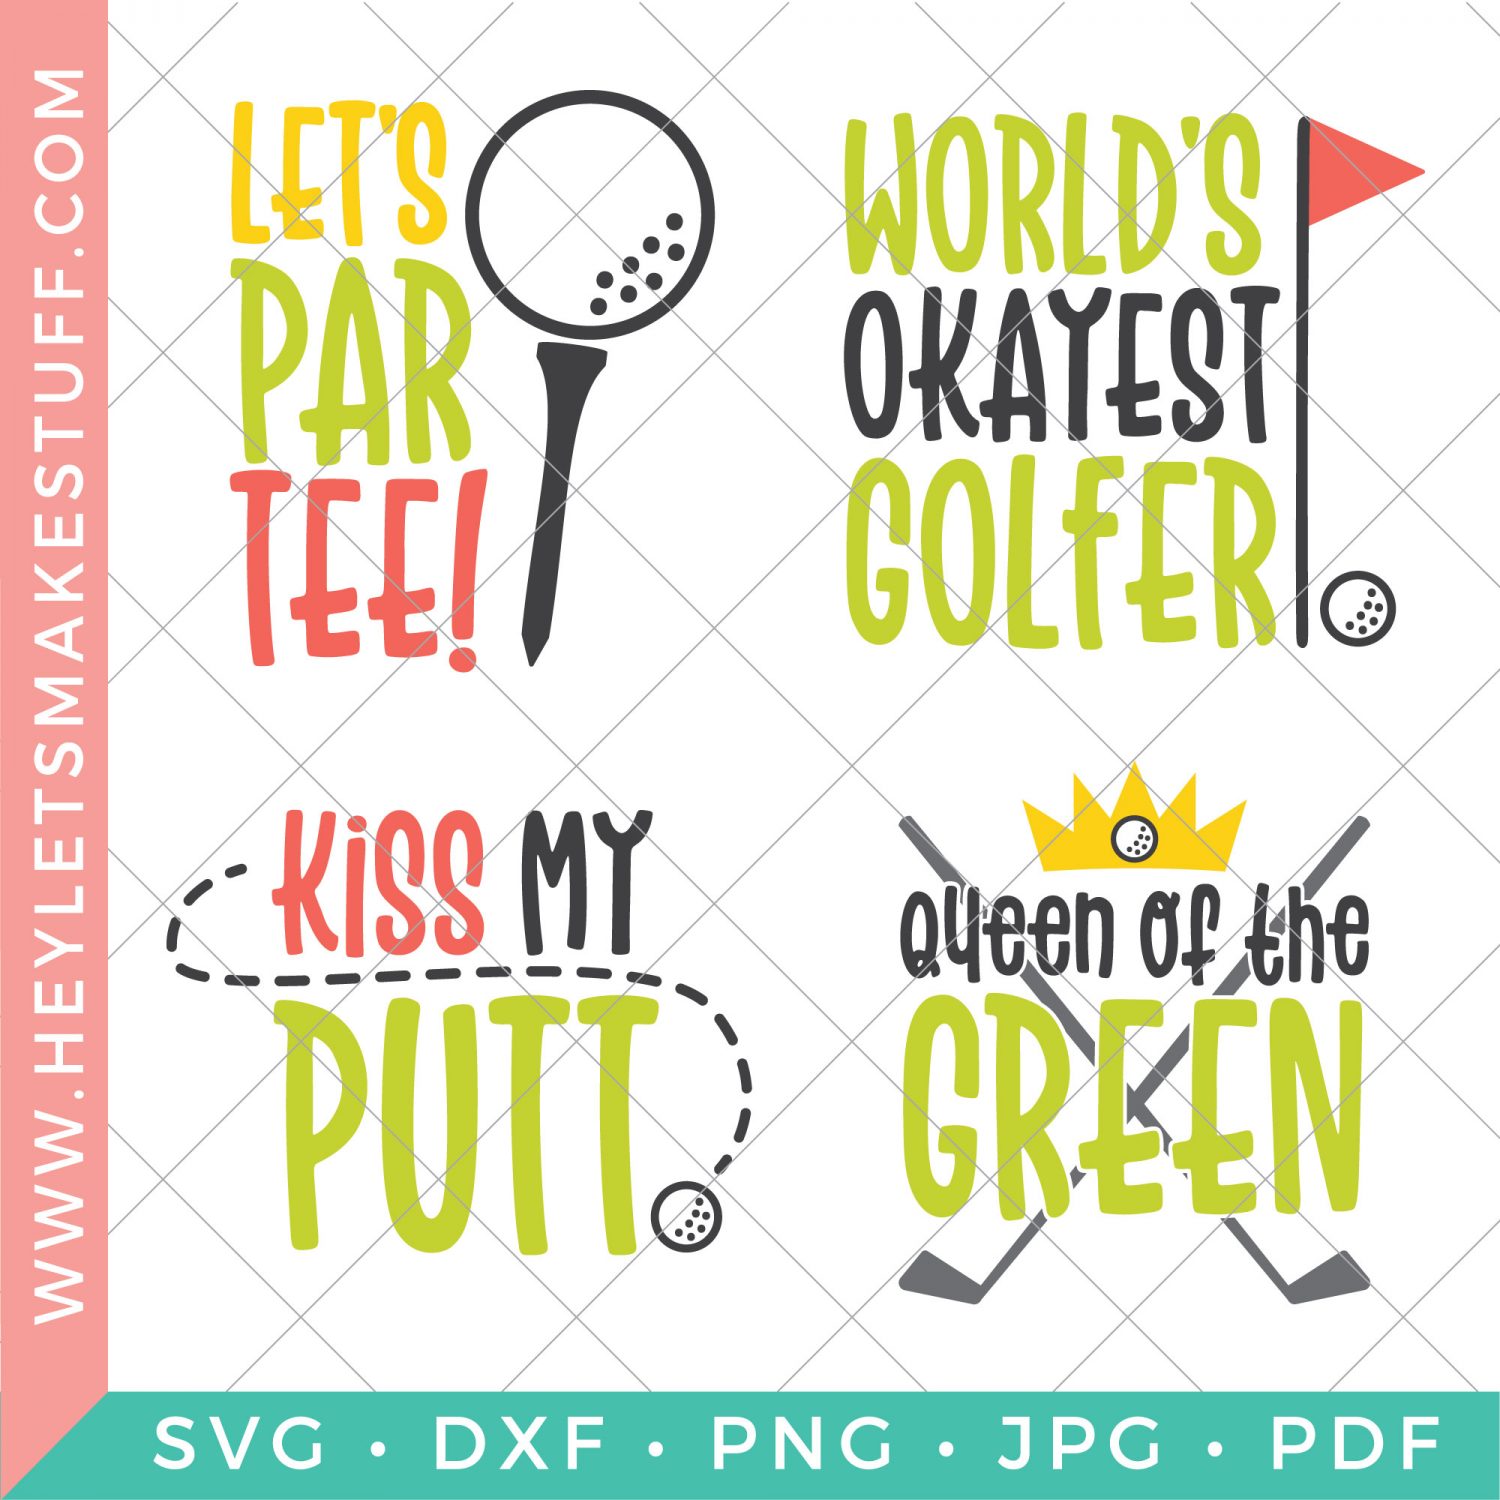 Four files in the funny golf SVG bundle